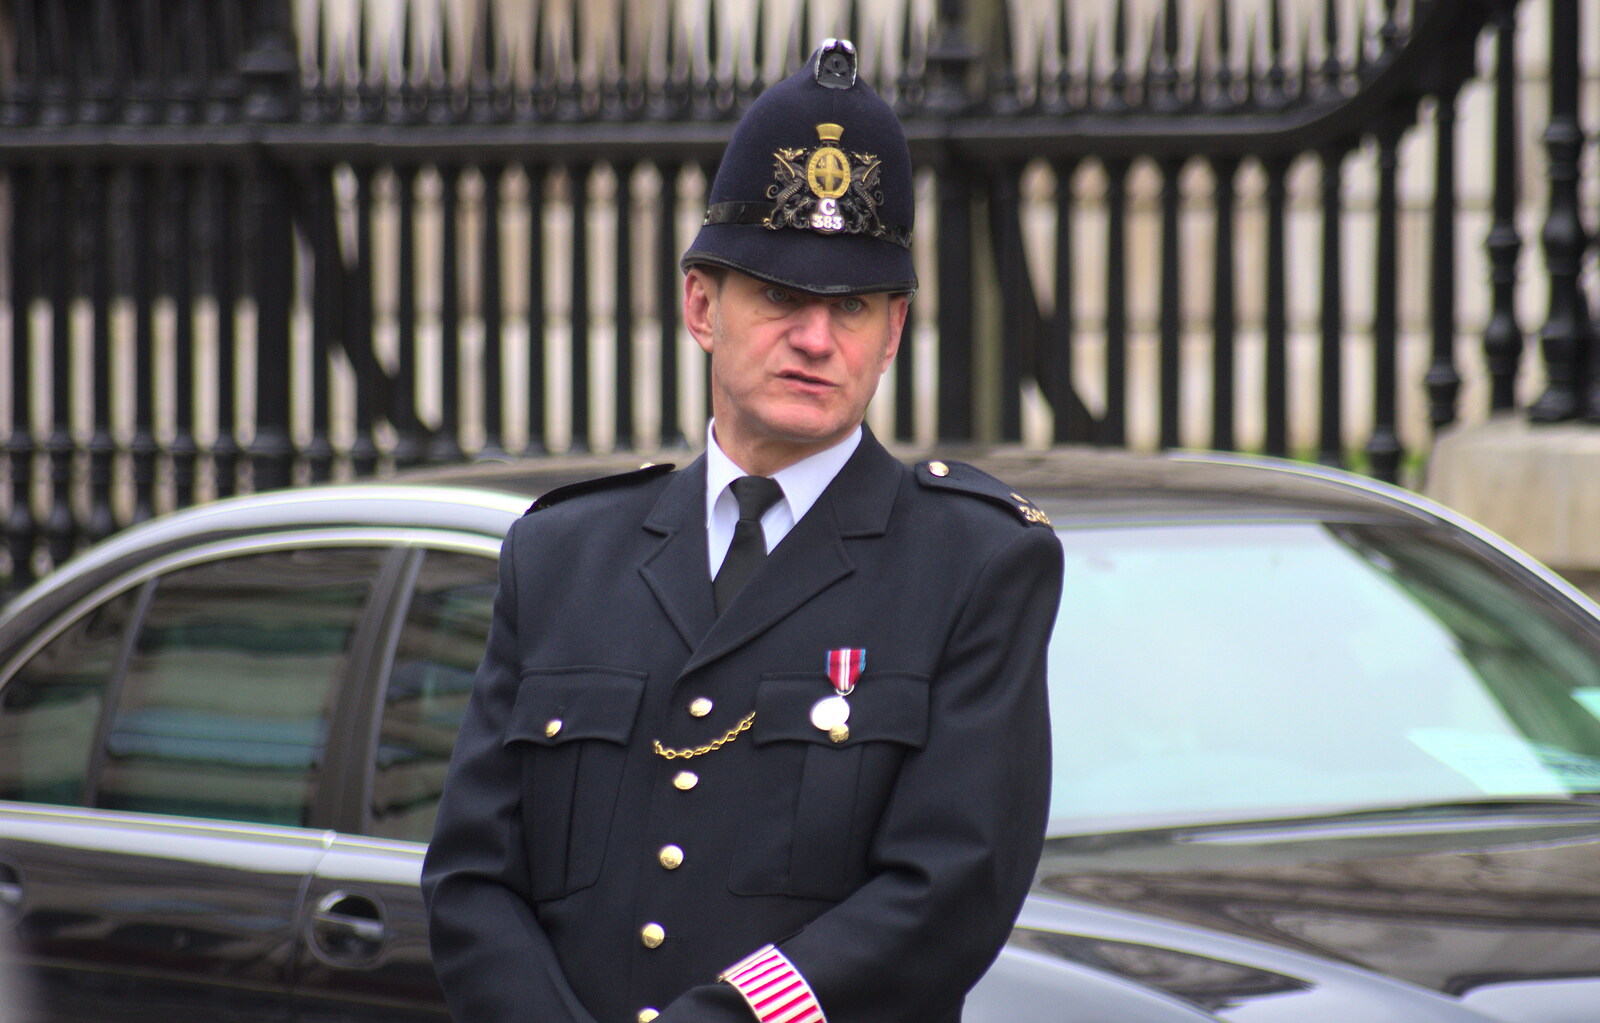 A City of London Rozzer, in ceremonial uniform from Margaret Thatcher's Funeral, St. Paul's, London - 17th April 2013